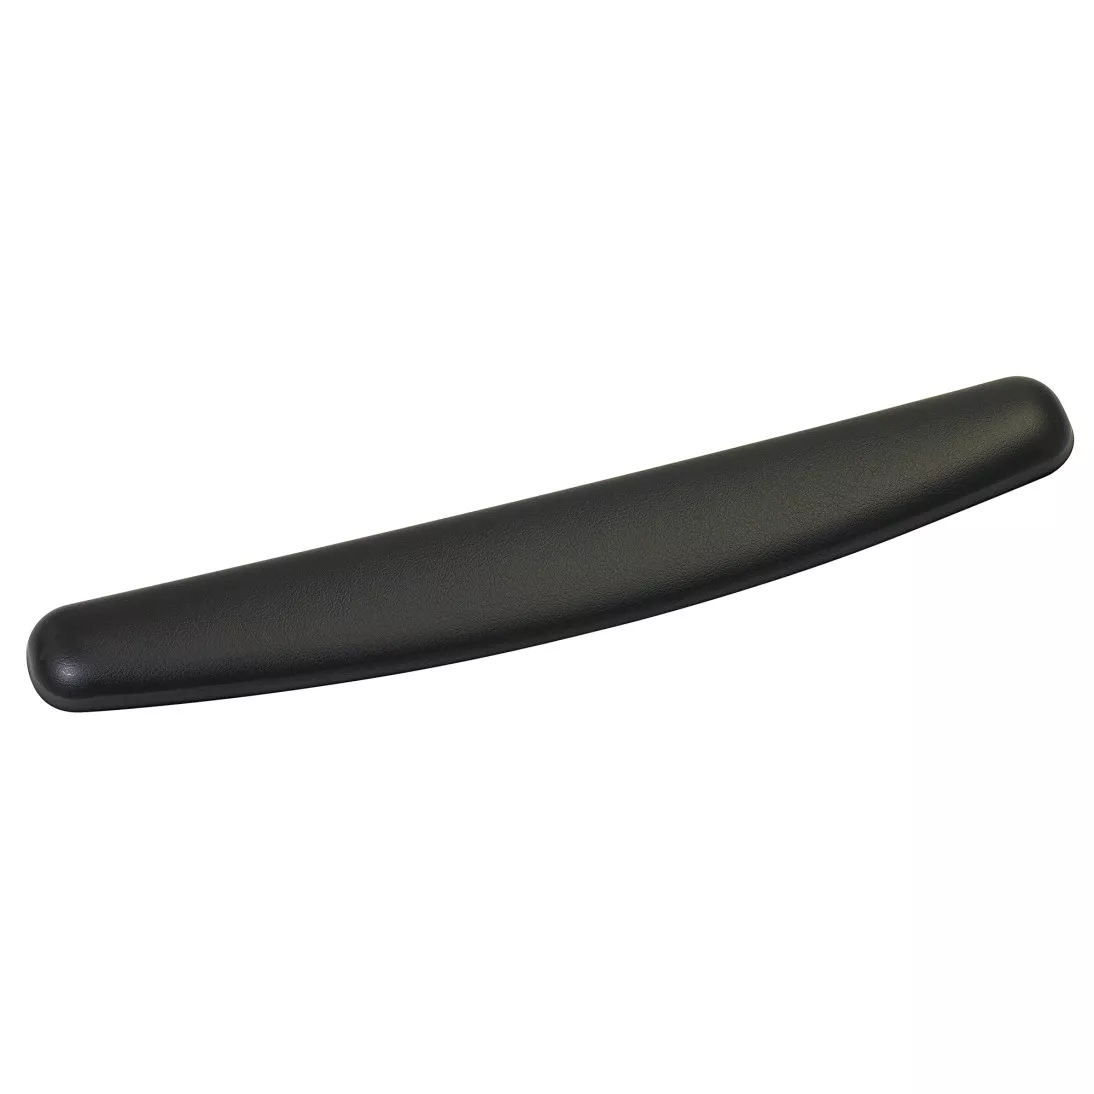 3M™ Gel Wrist Rest WR309LE, with Antimicrobial Product Protect, 25%
Recycled Content, Leatherette, Blk 2.75 in x 18.0 in x 0.75 in